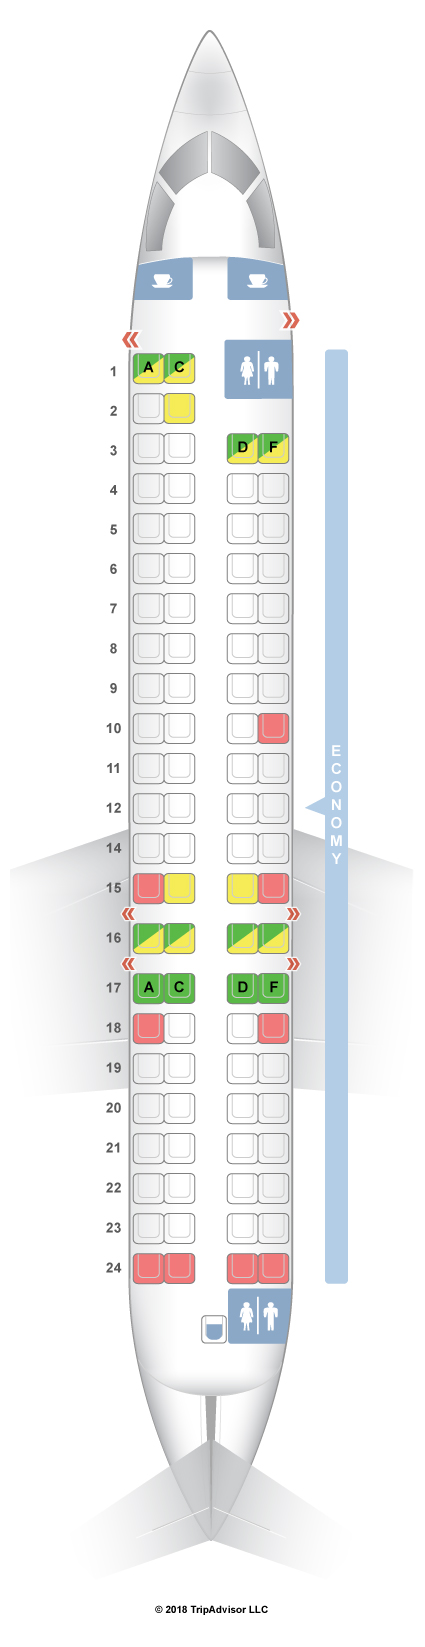 How do you find a CRJ-900 seating chart?